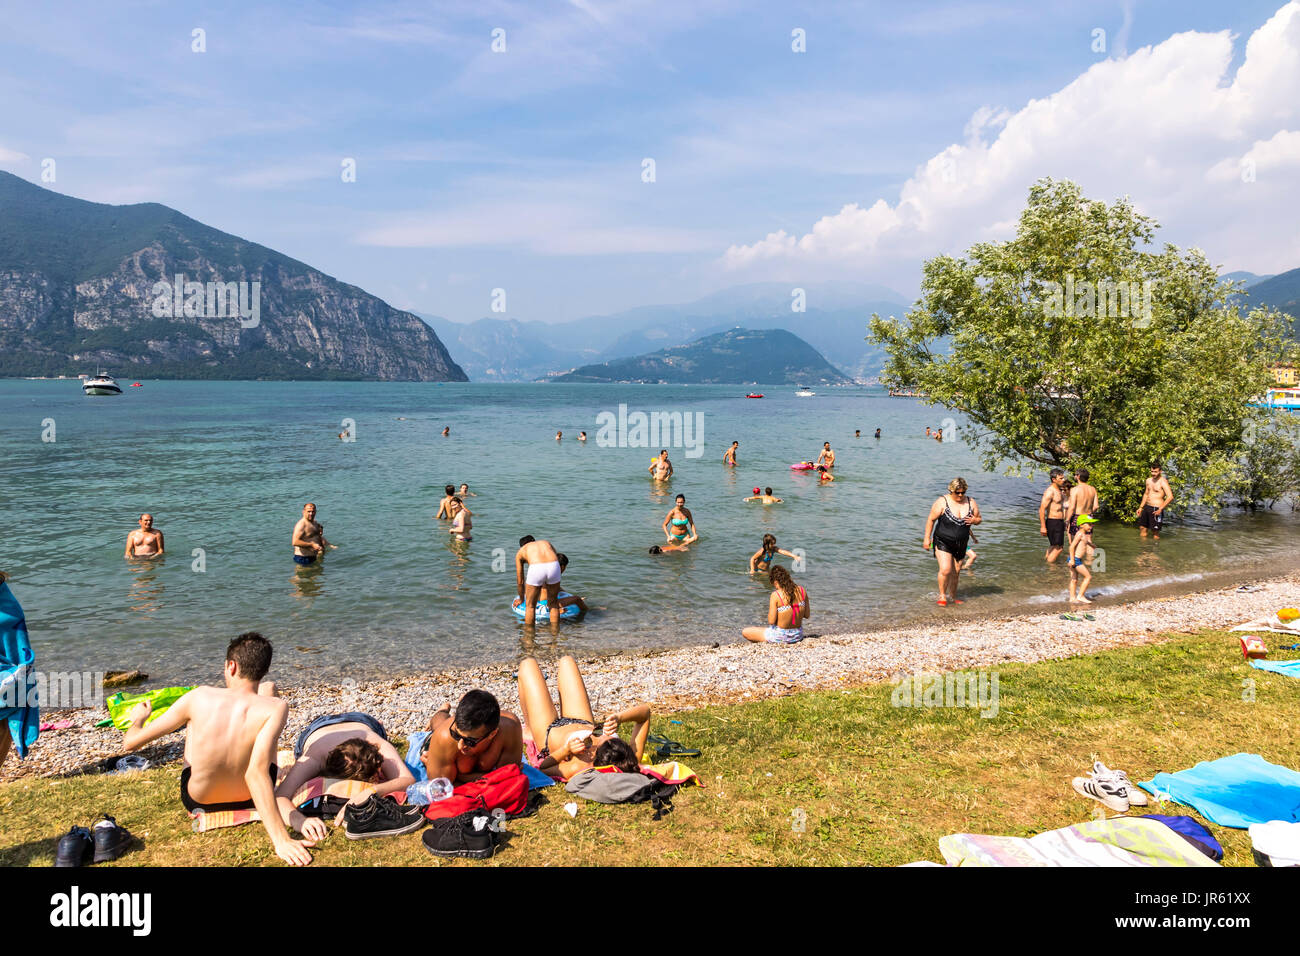 ISEO, ITALY - JUNE 17, 2017: Crowded summer beach on Iseo lake, Iseo city, Lombardy, Italy. Lake Iseo or Lago d'Iseo or Sebino is the 4th largest lake Stock Photo